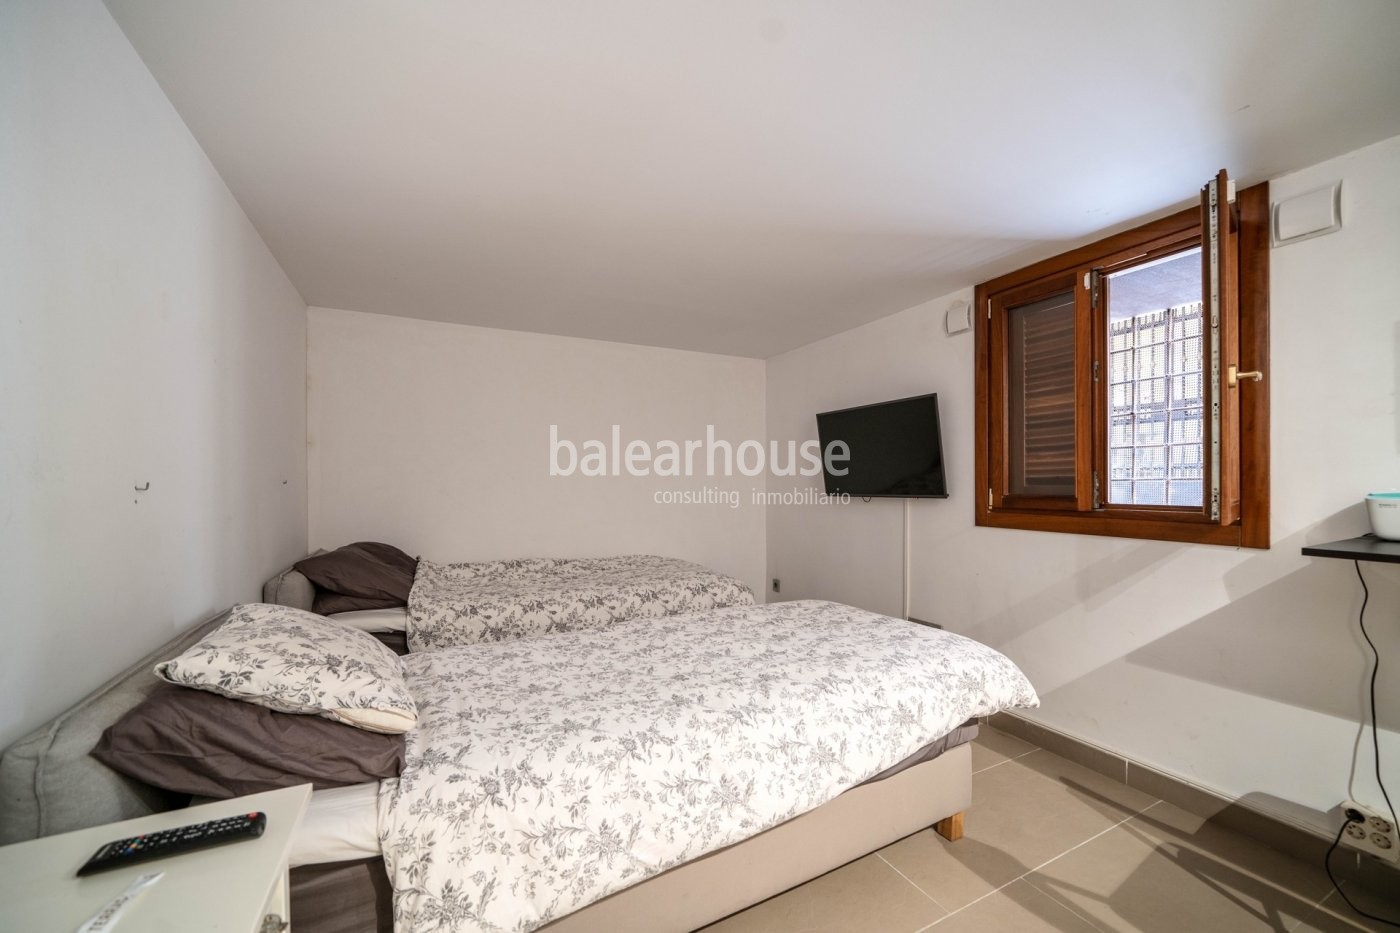 Beautiful ground floor flat with terrace in the heart of the old town